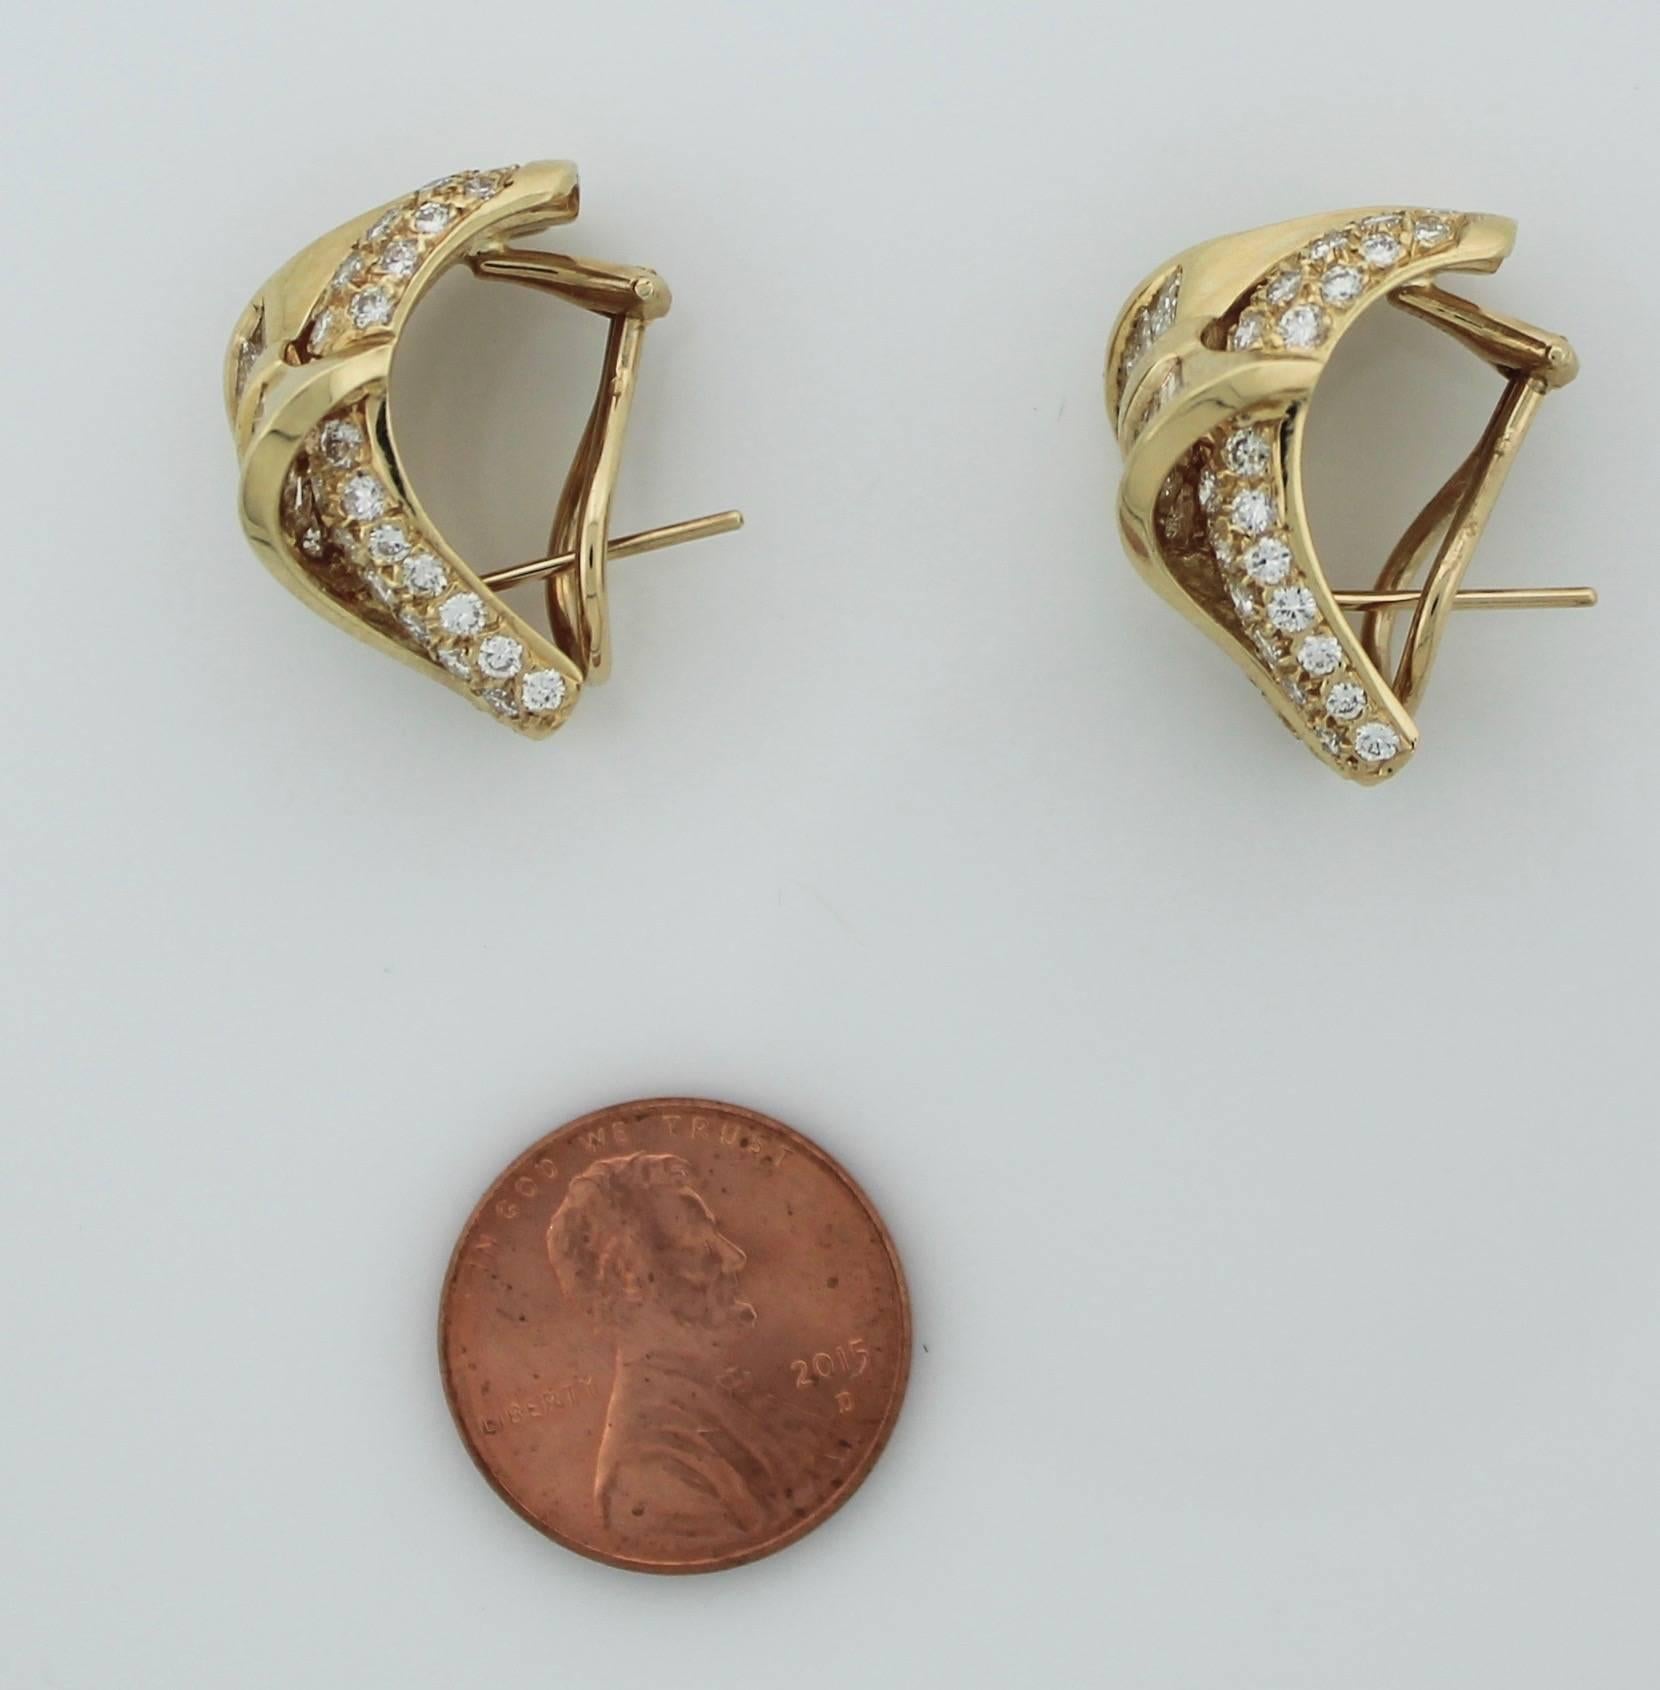 Diamond Clip Earrings with Bow motif:
Born in the 70's they have a nice weight to them (not hollowed out) like the cheaply made jewelry of today
with 16 tapered baguette diamond weighing 2.00 carats (approximately)
and 154 round brilliant cut